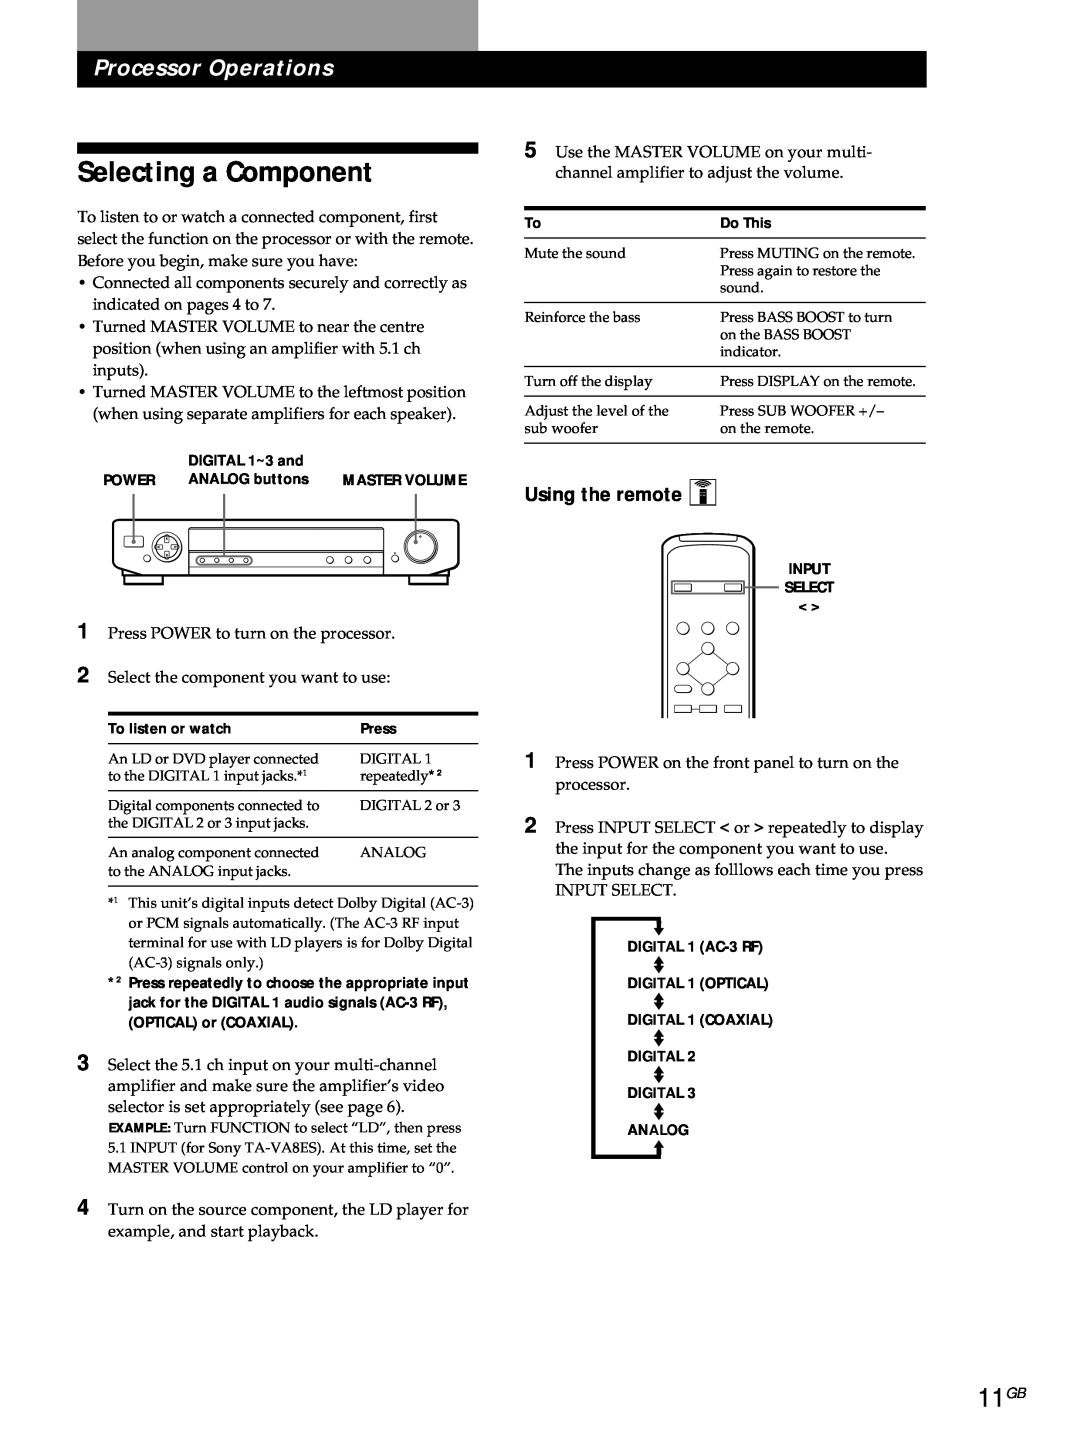 Sony SDP-E800 operating instructions Selecting a Component, 11GB, Processor Operations, Using the remote Z 